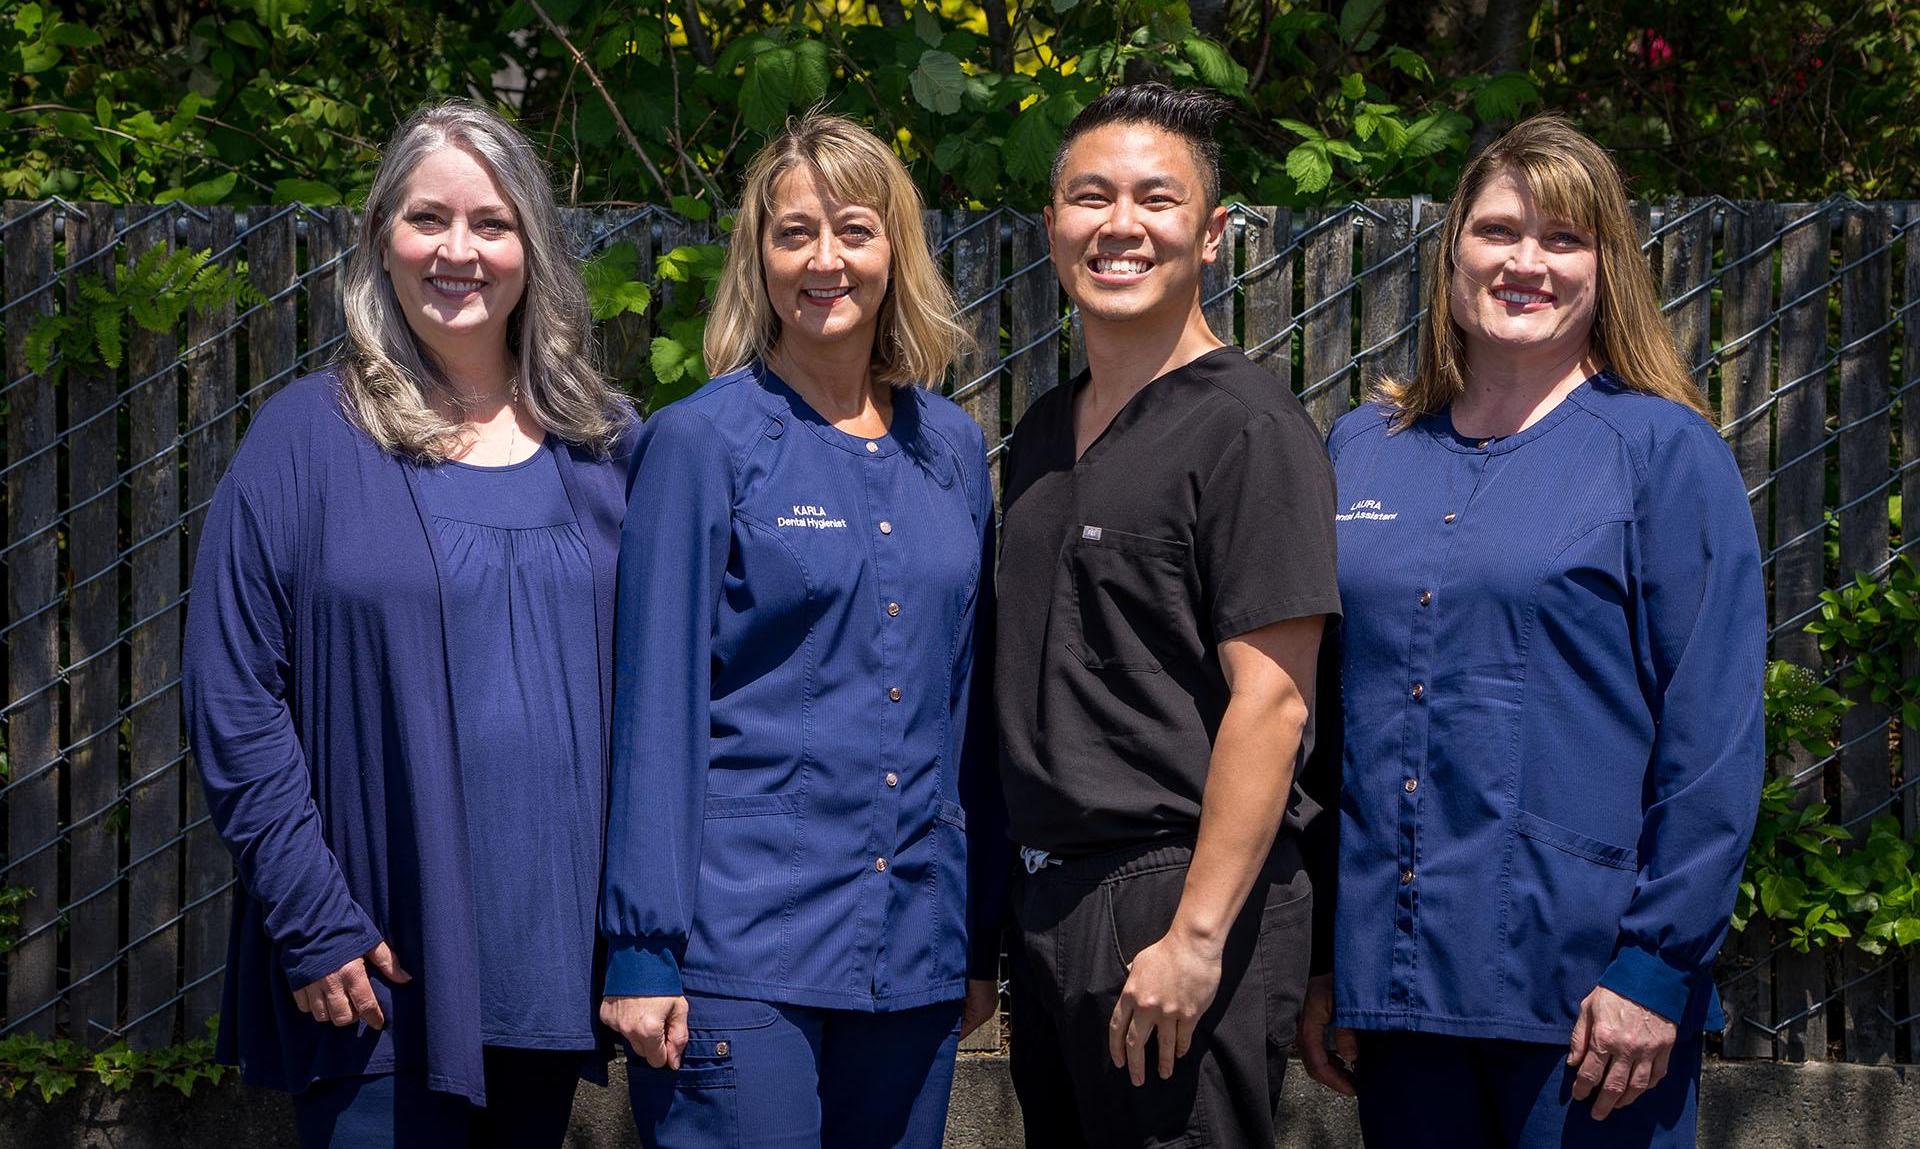 The Seahurst Smiles of Burien dentist and dental team smiling outdoors